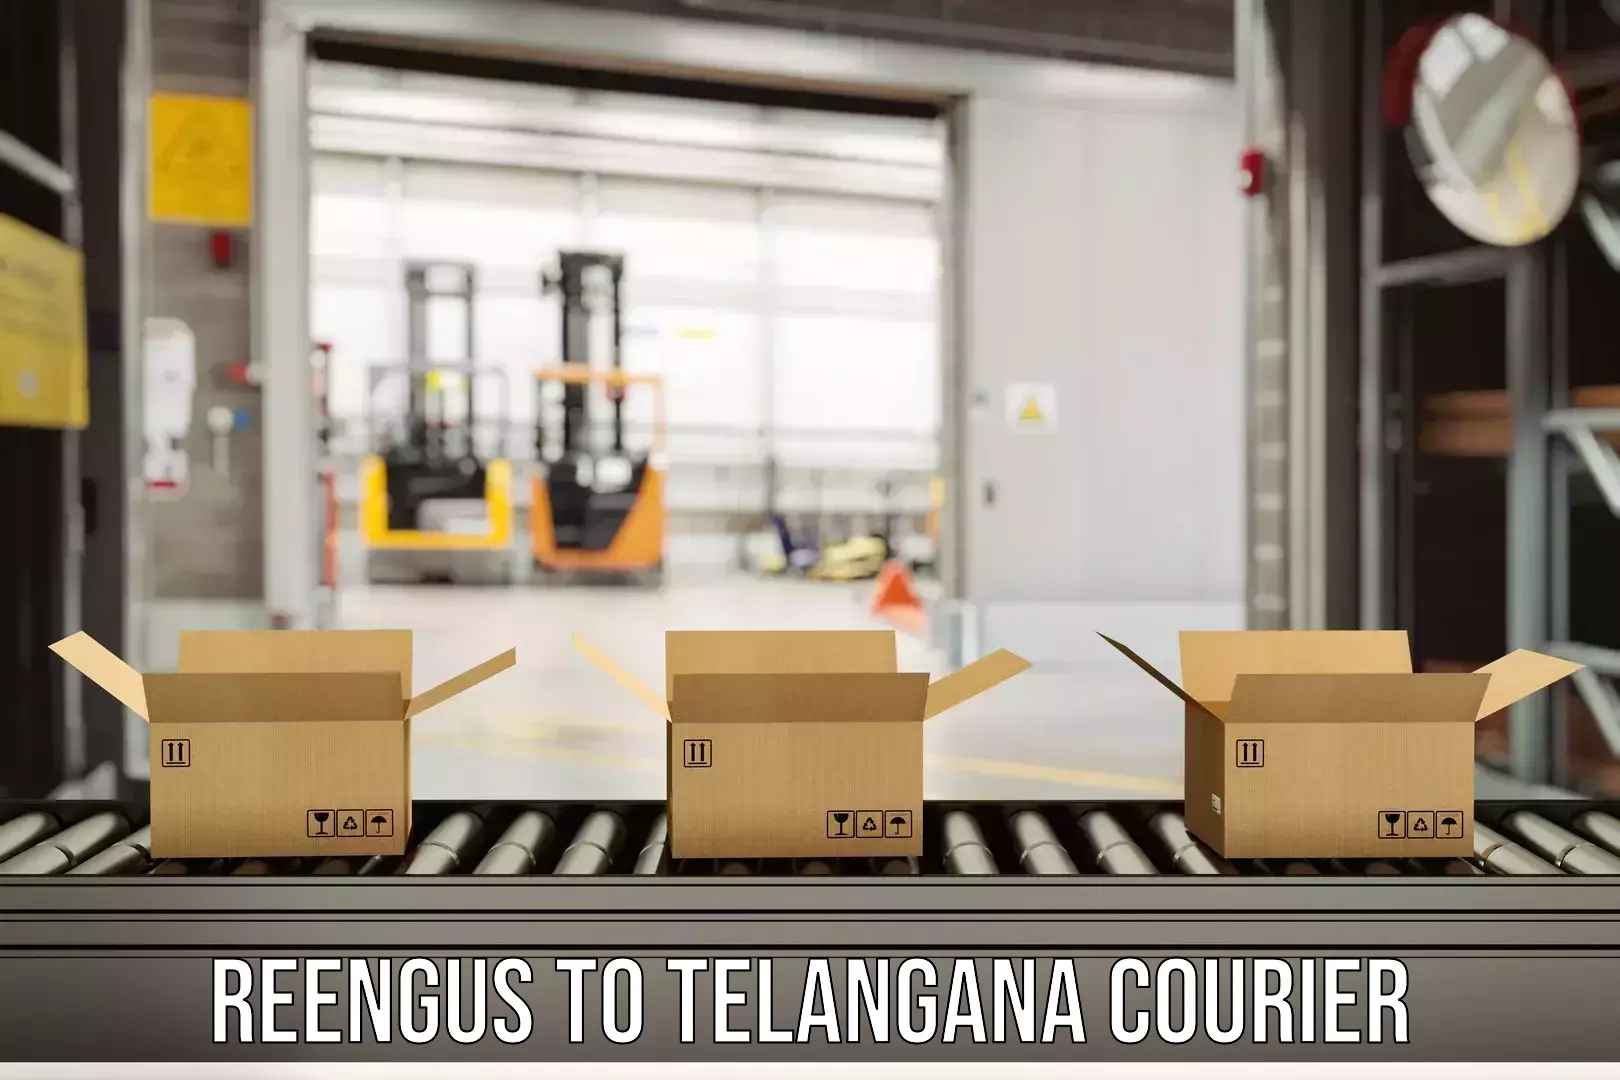 Courier service comparison Reengus to Telangana